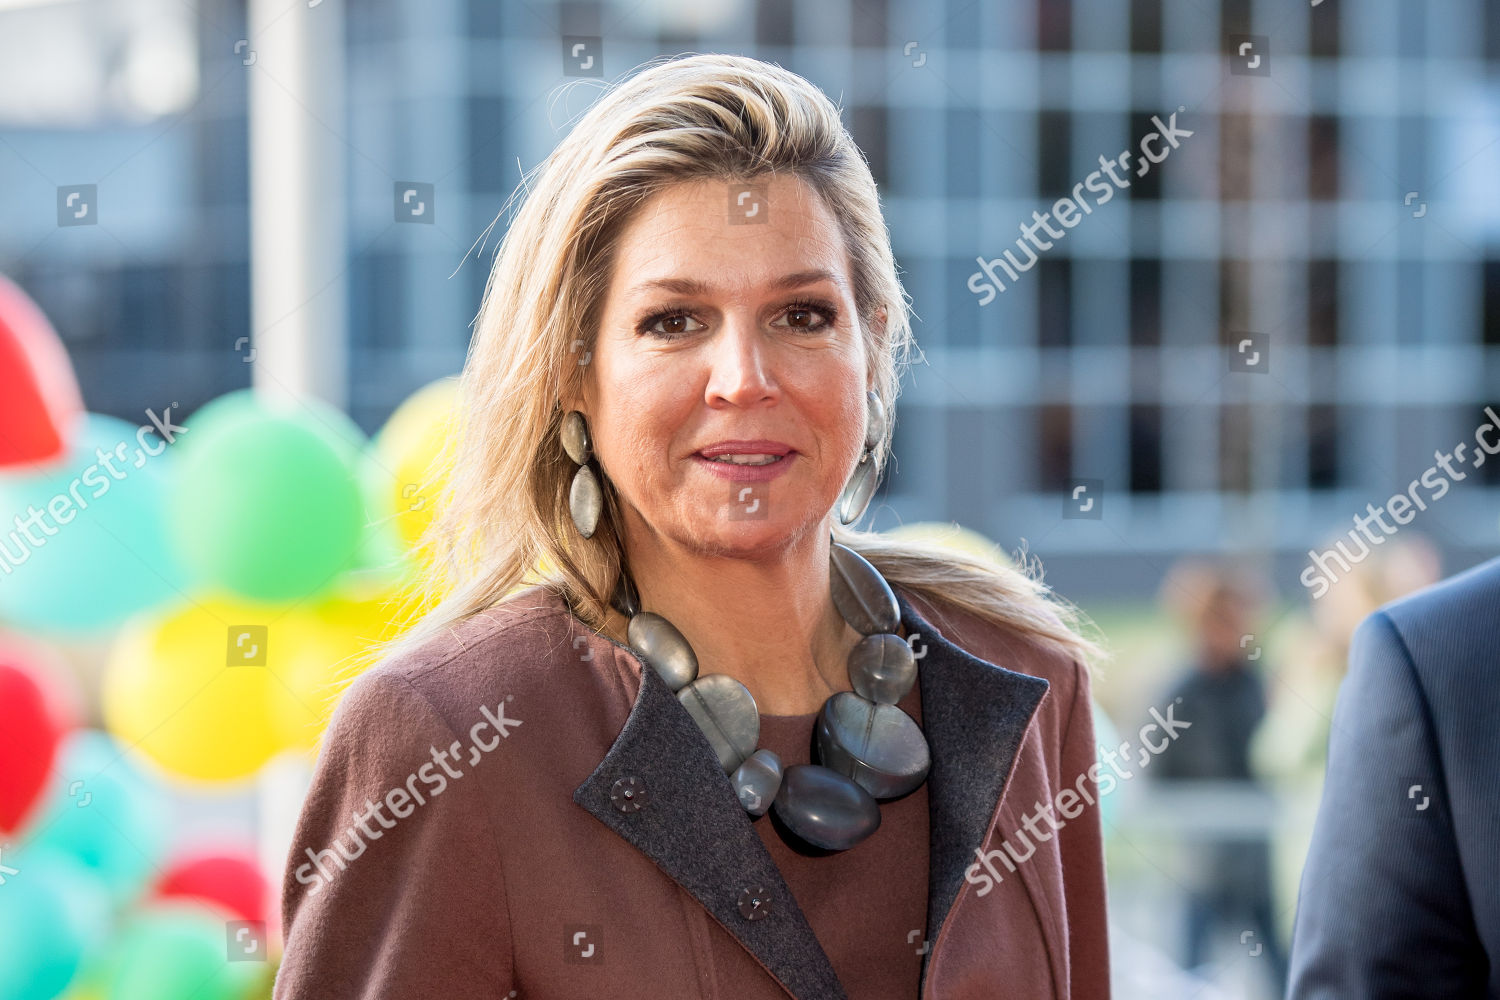 queen-maxima-visit-to-113-suicide-prevention-amsterdam-the-netherlands-shutterstock-editorial-9958871k.jpg